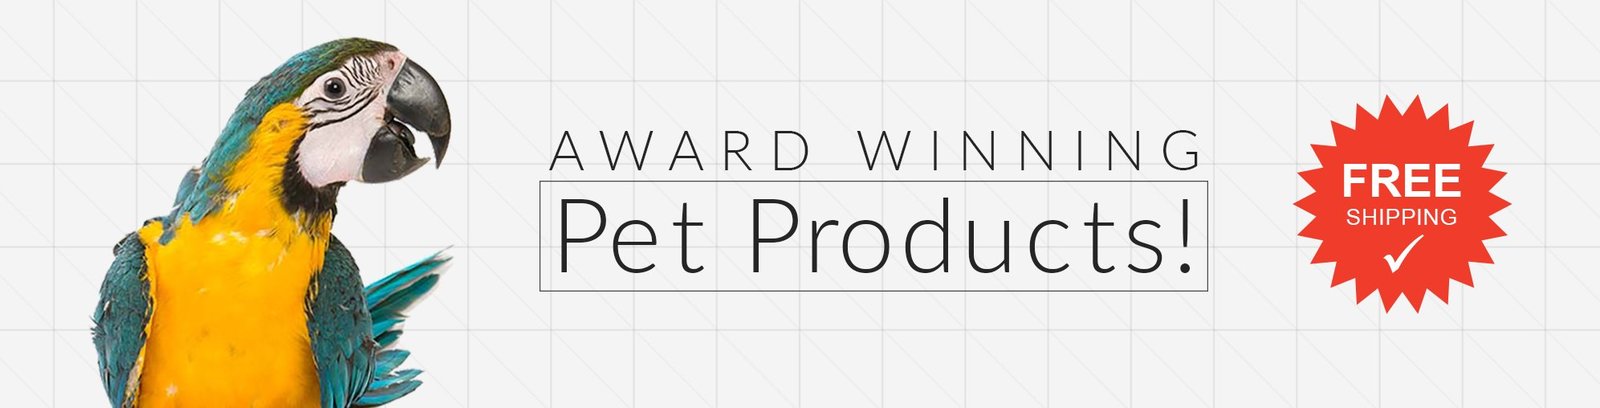 Award Winning Pet Products with Free Shipping! Pet Media Plus - teach your parrot to speak